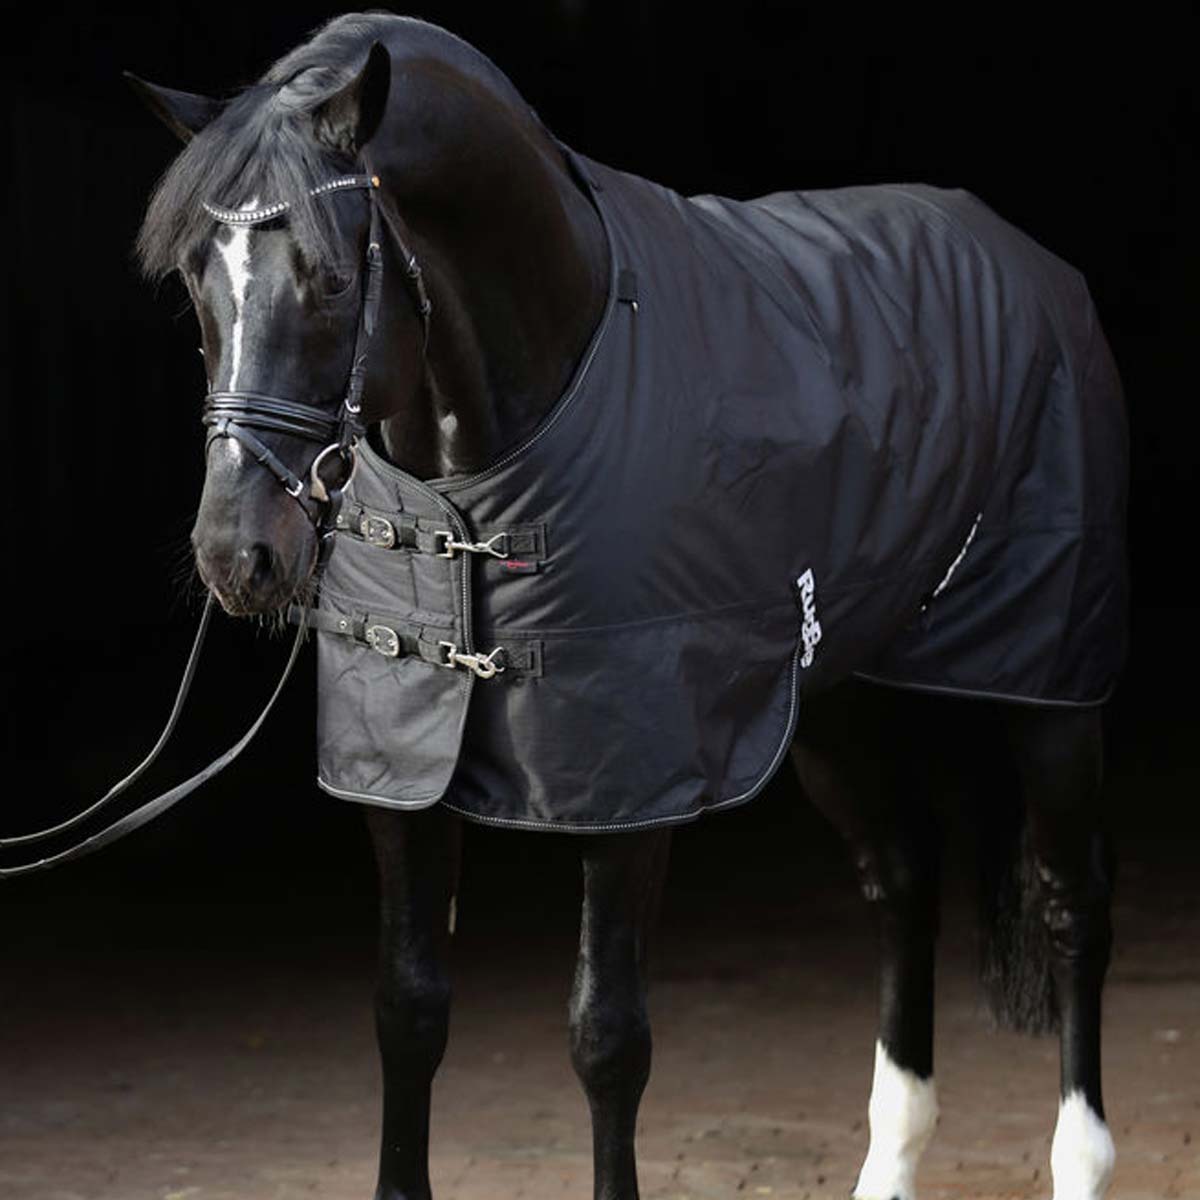 Covalliero RugBe Winter rug 600D, 200g 115